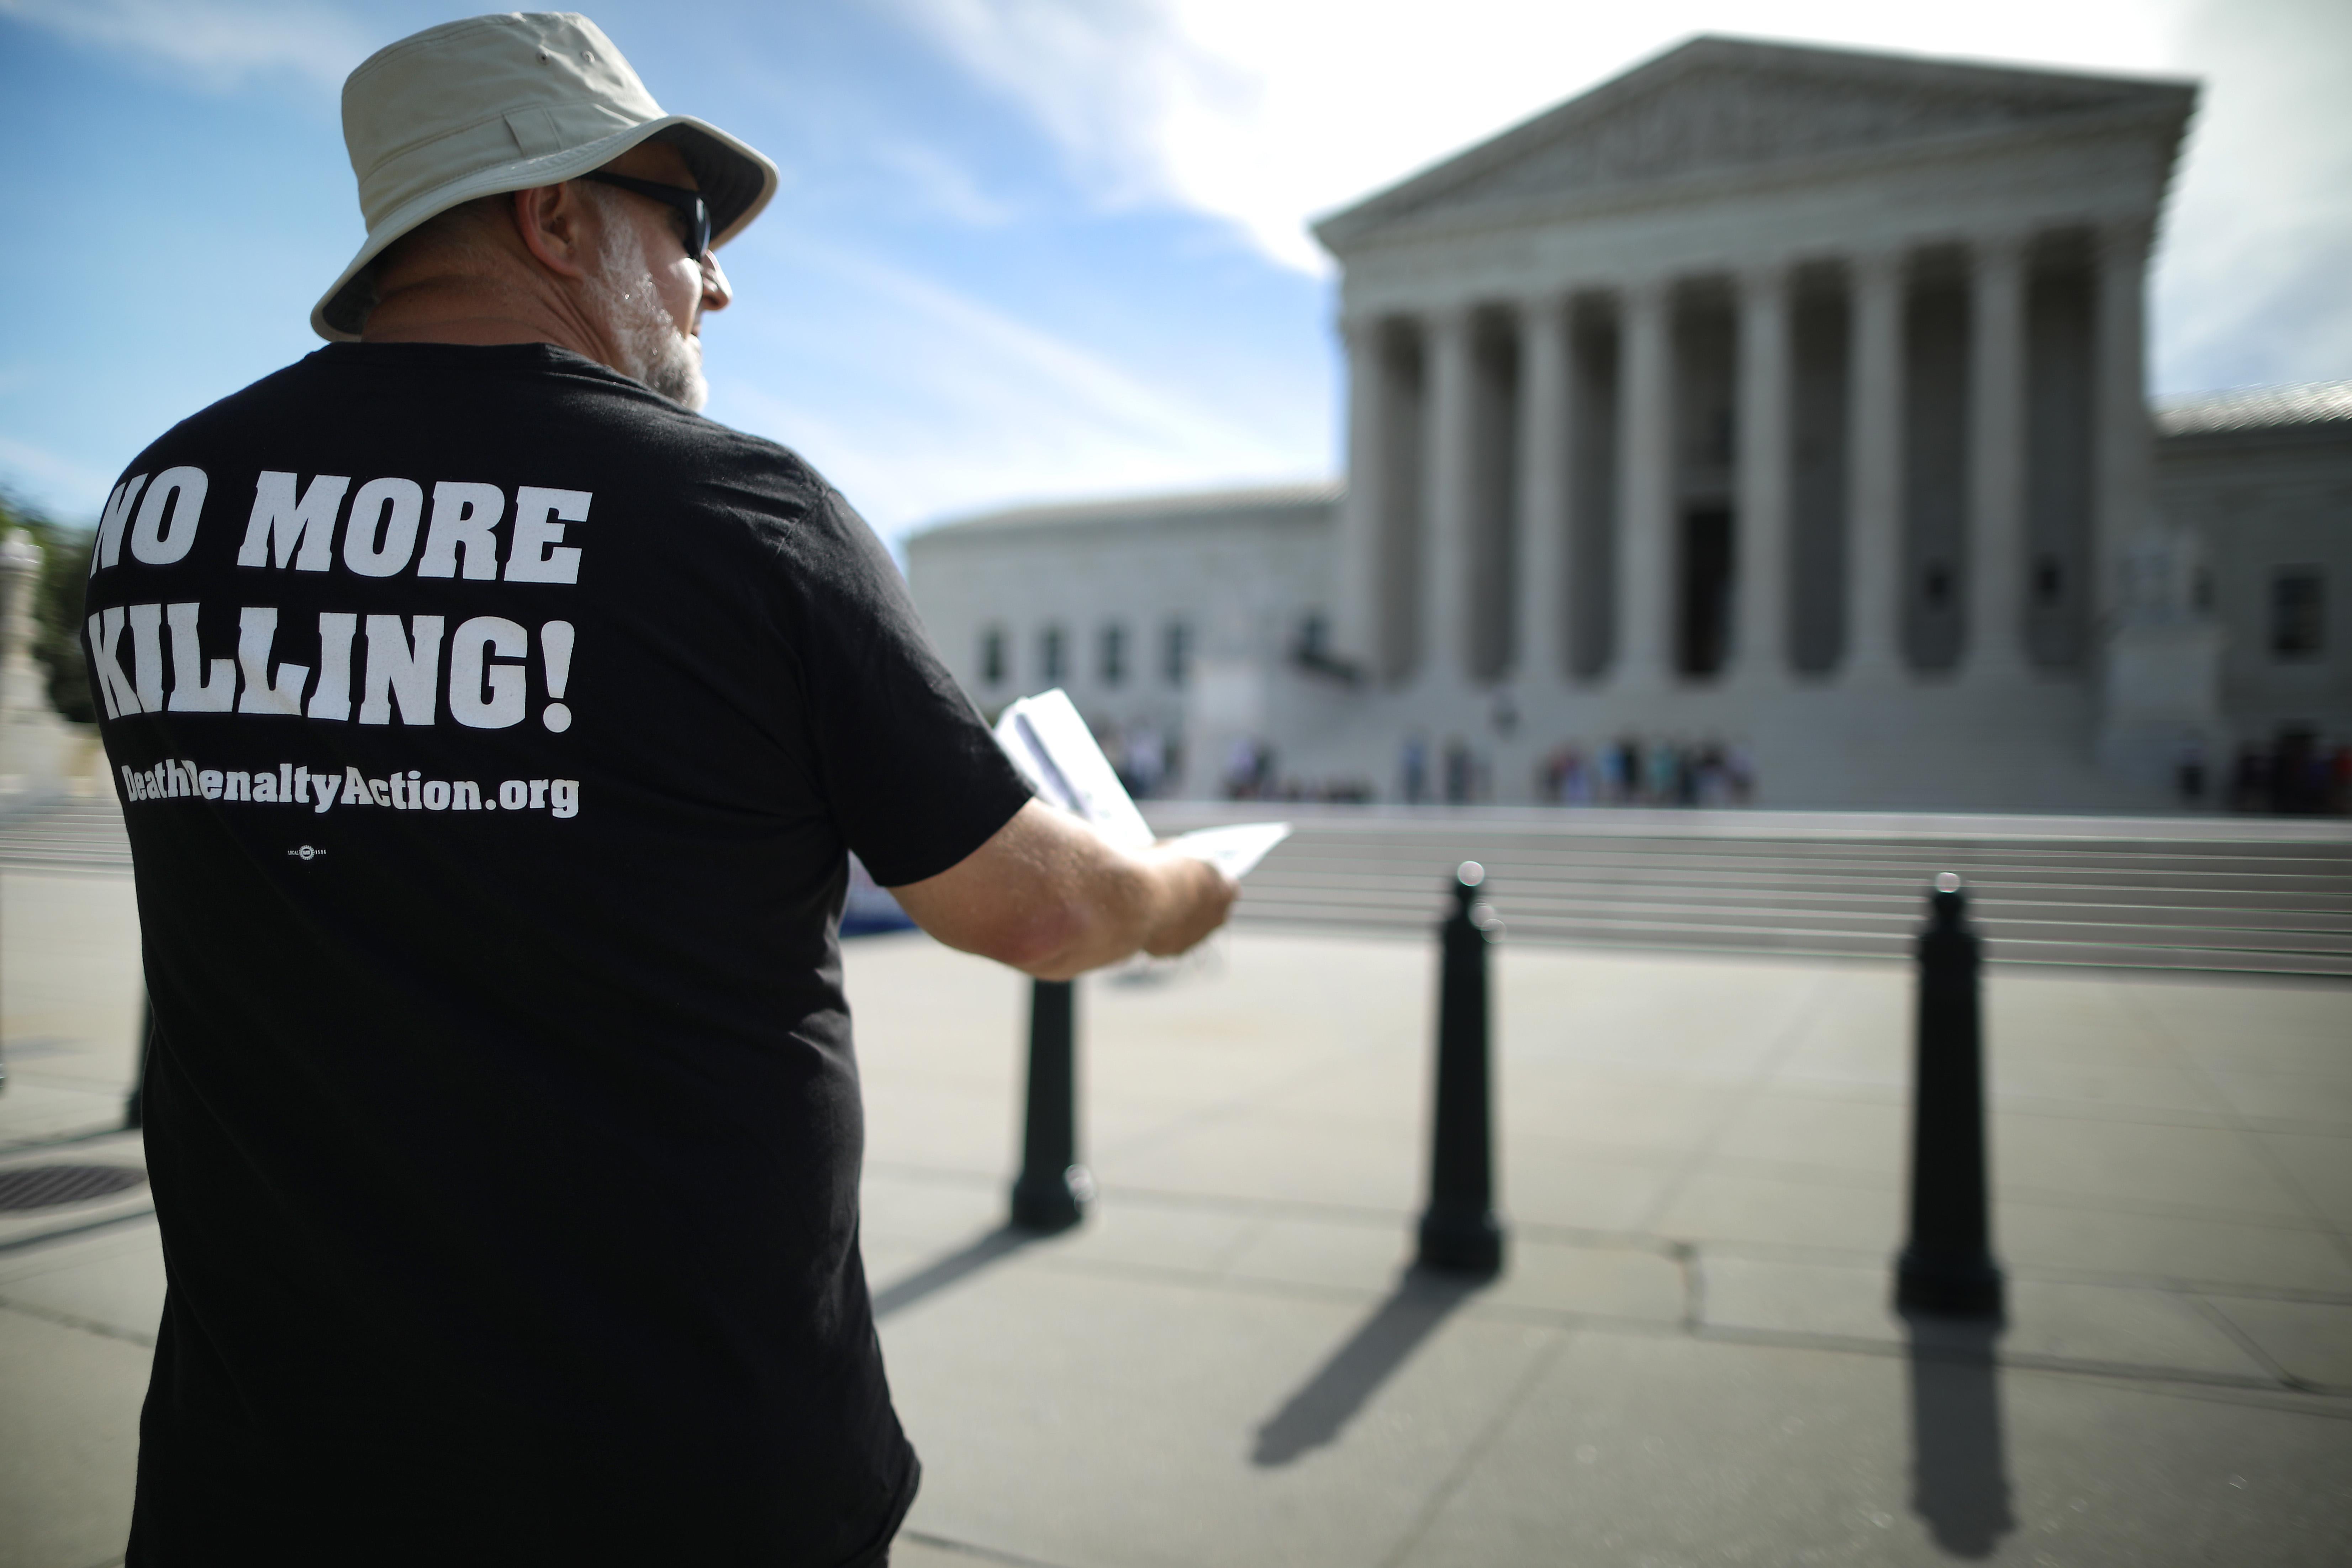 Bonowitz stands in front of the Supreme Court wearing a tee shirt that says "No More Killing!" 